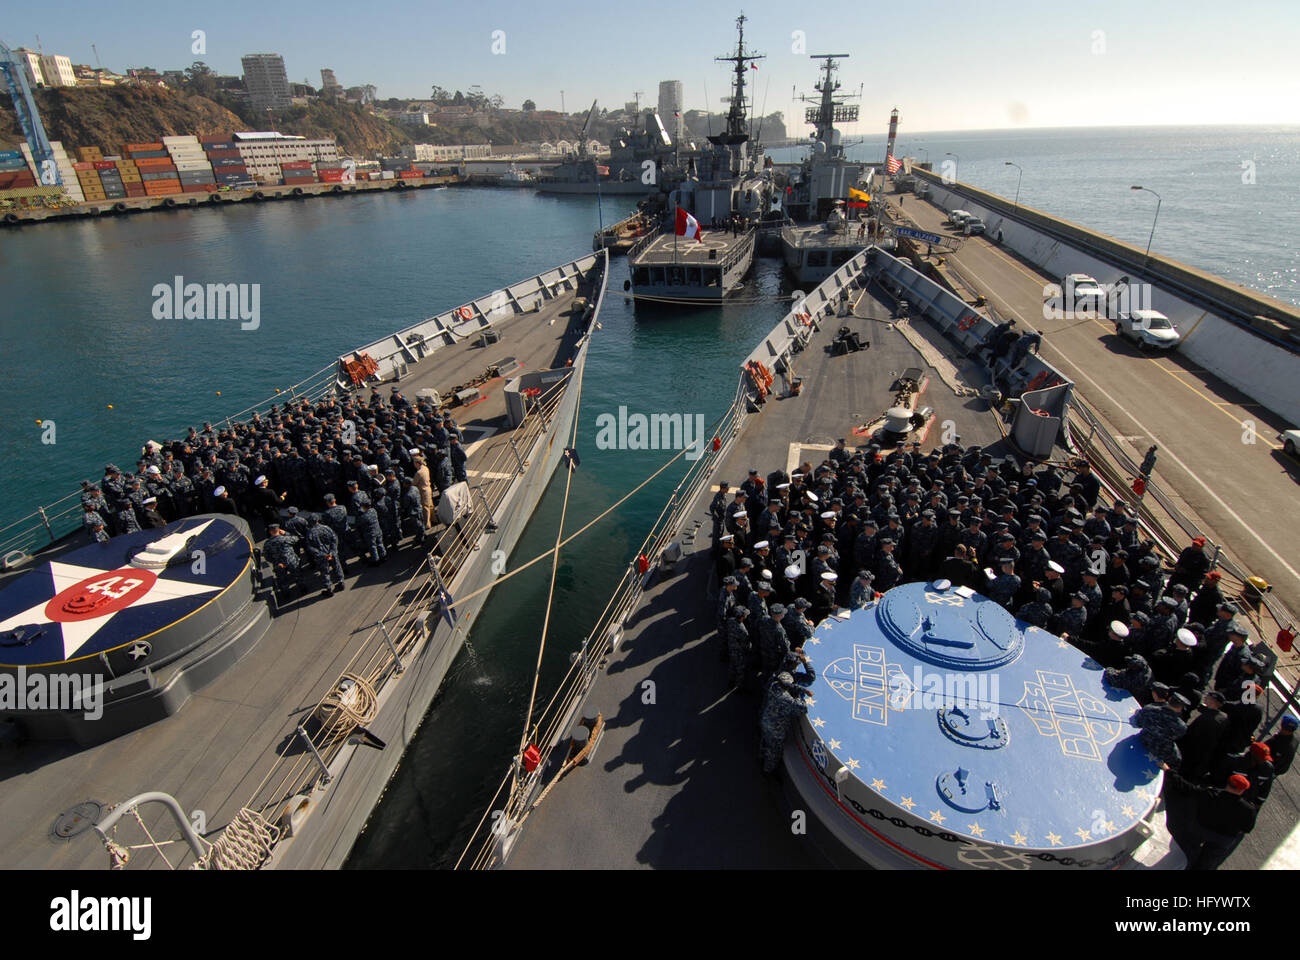 110624-N-ZI300-087 VAPLARAISO, Chile (June 24, 2011) Sailors aboard the guided-missile frigates USS Thach and USS Boone (FFG 28) gather on the foc'sle for a briefing after arriving in Valparaiso, Chile. Thach and Boone will participate in the Chilean navy-hosted Pacific phase of UNITAS 52. Thach and Boone are deployed to South America supporting Southern Seas 2011. (U.S. Navy photo by Mass Communication Specialist 1st Class Steve Smith/Released) US Navy 110624-N-ZI300-087 Sailors aboard the guided-missile frigates USS Thach and USS Boone (FFG 28) gather on the foc'sle for a briefing after a Stock Photo